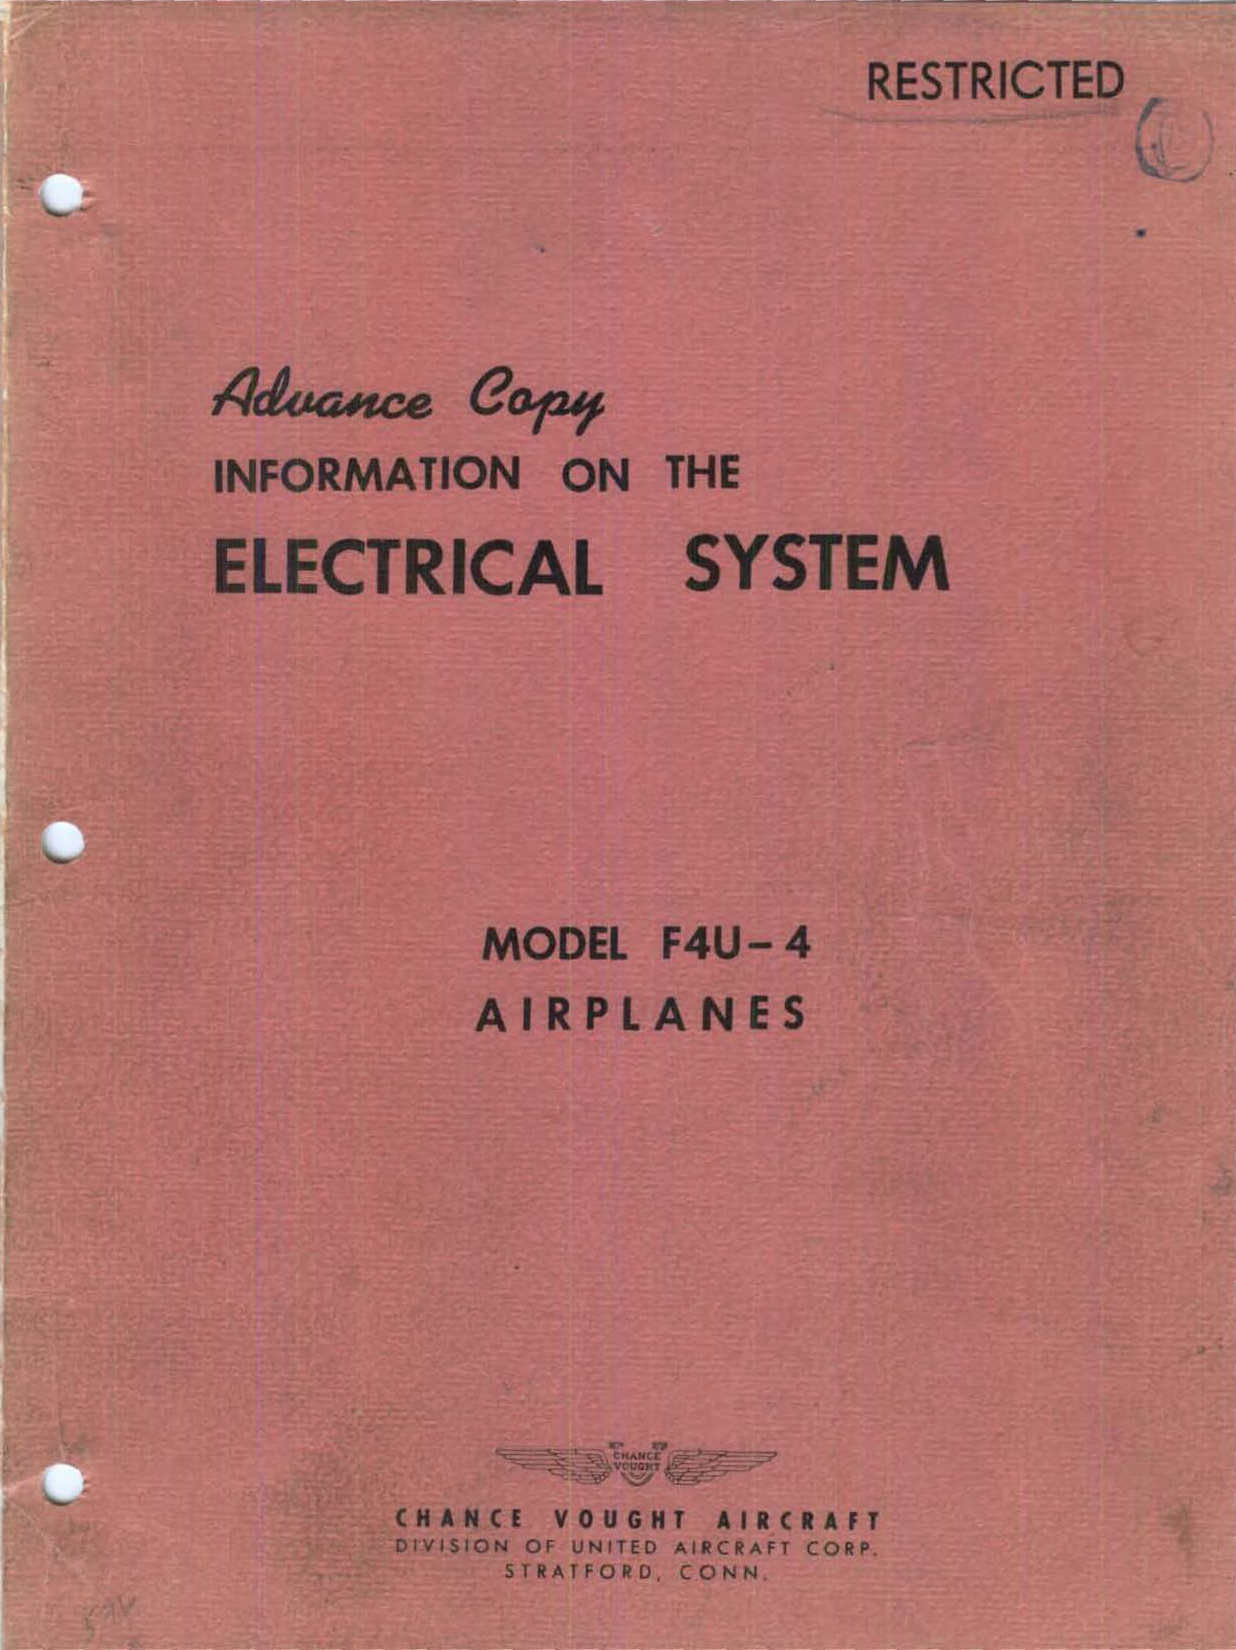 Sample page 1 from AirCorps Library document: Information on the Electrical System for F4U-4